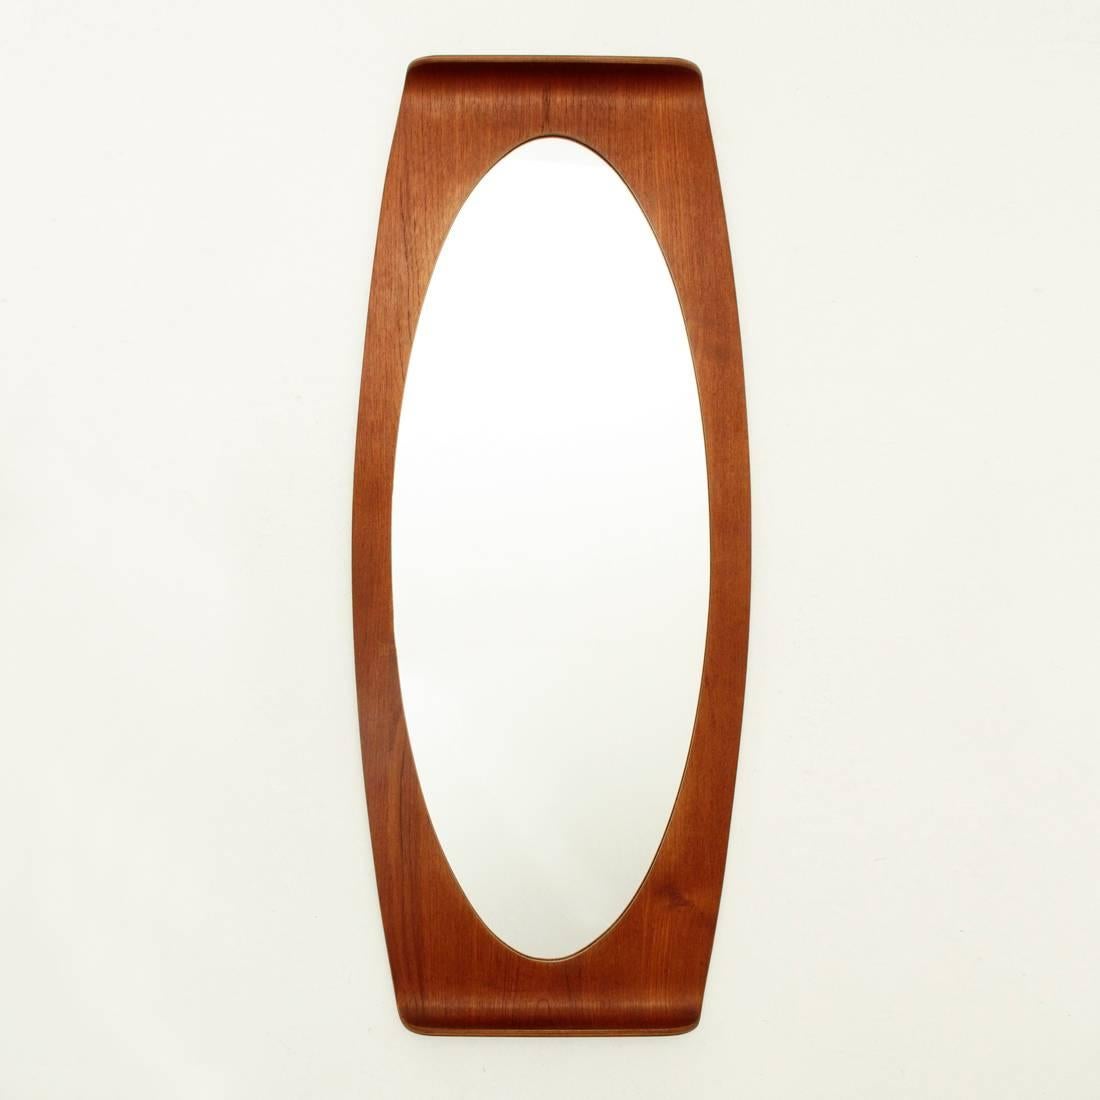 Mirror produced by Home design by Franco Campo and Carlo Graffi.
Curved wood structure.
Good conditions.

Dimensions: Width 50 cm - Depth 7 cm - Height 121 cm.